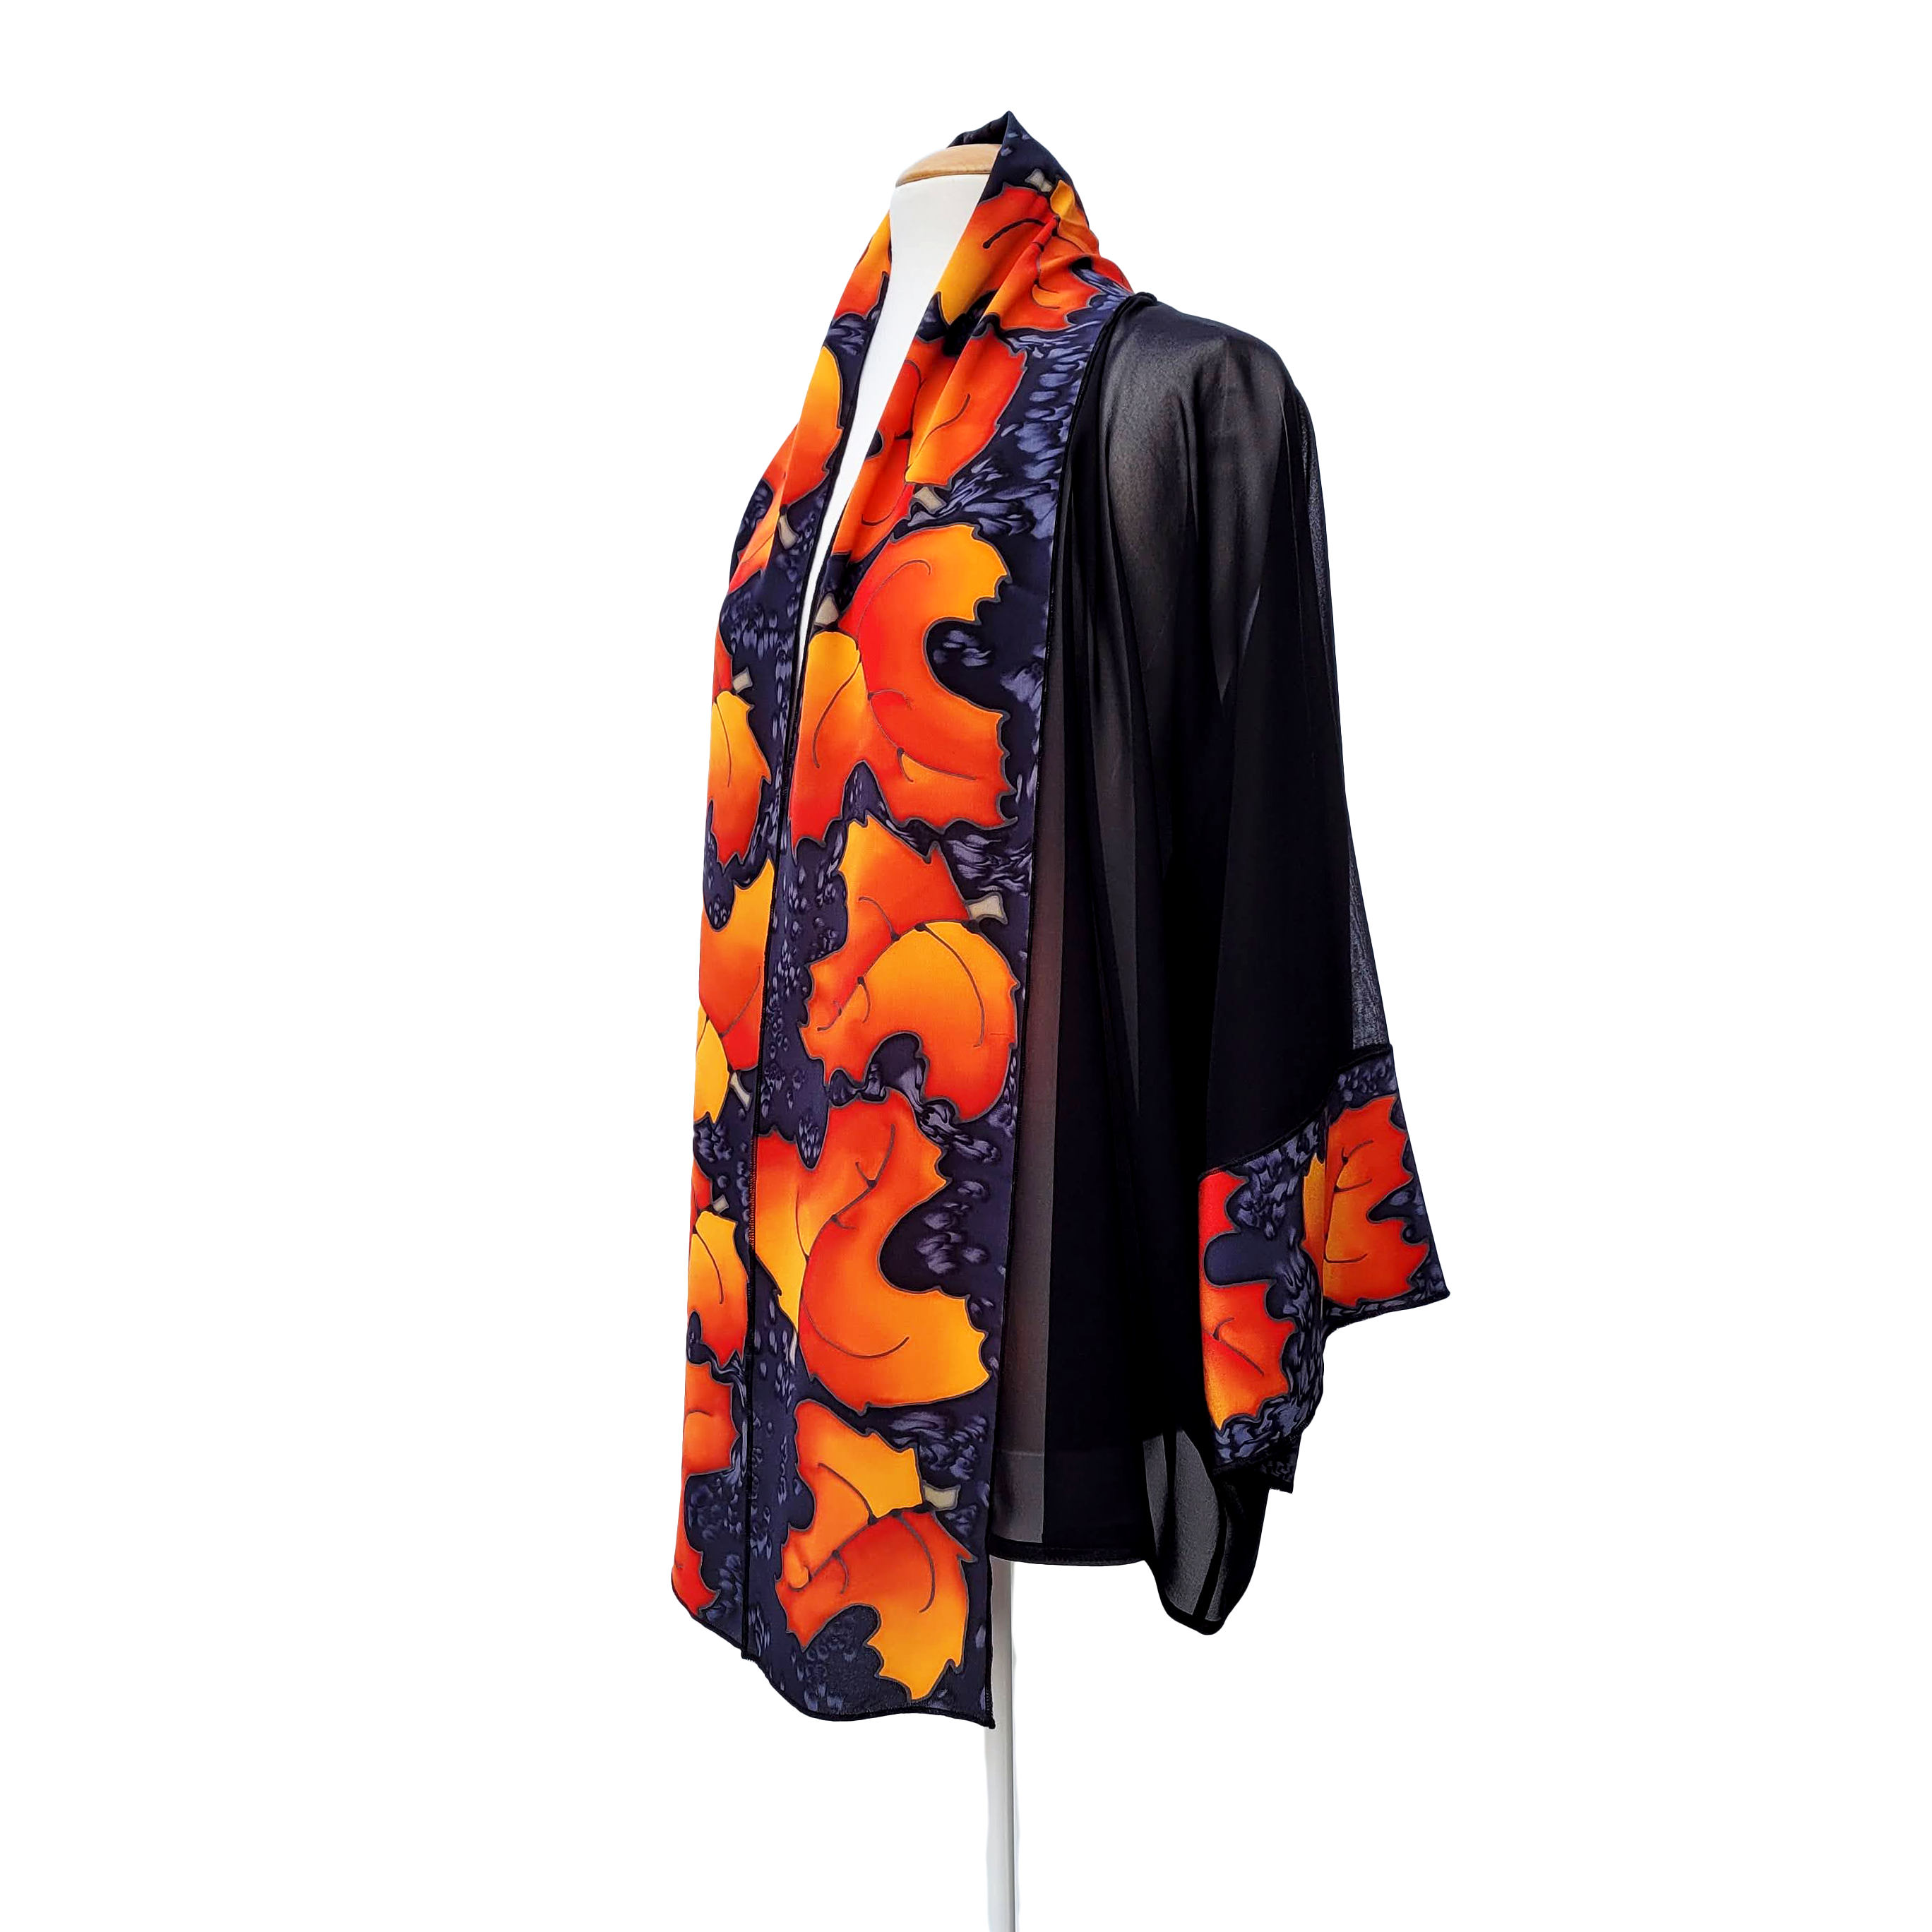 Ones size silk kimono for women hand painted golden autumn leaves made by Lynne Kiel